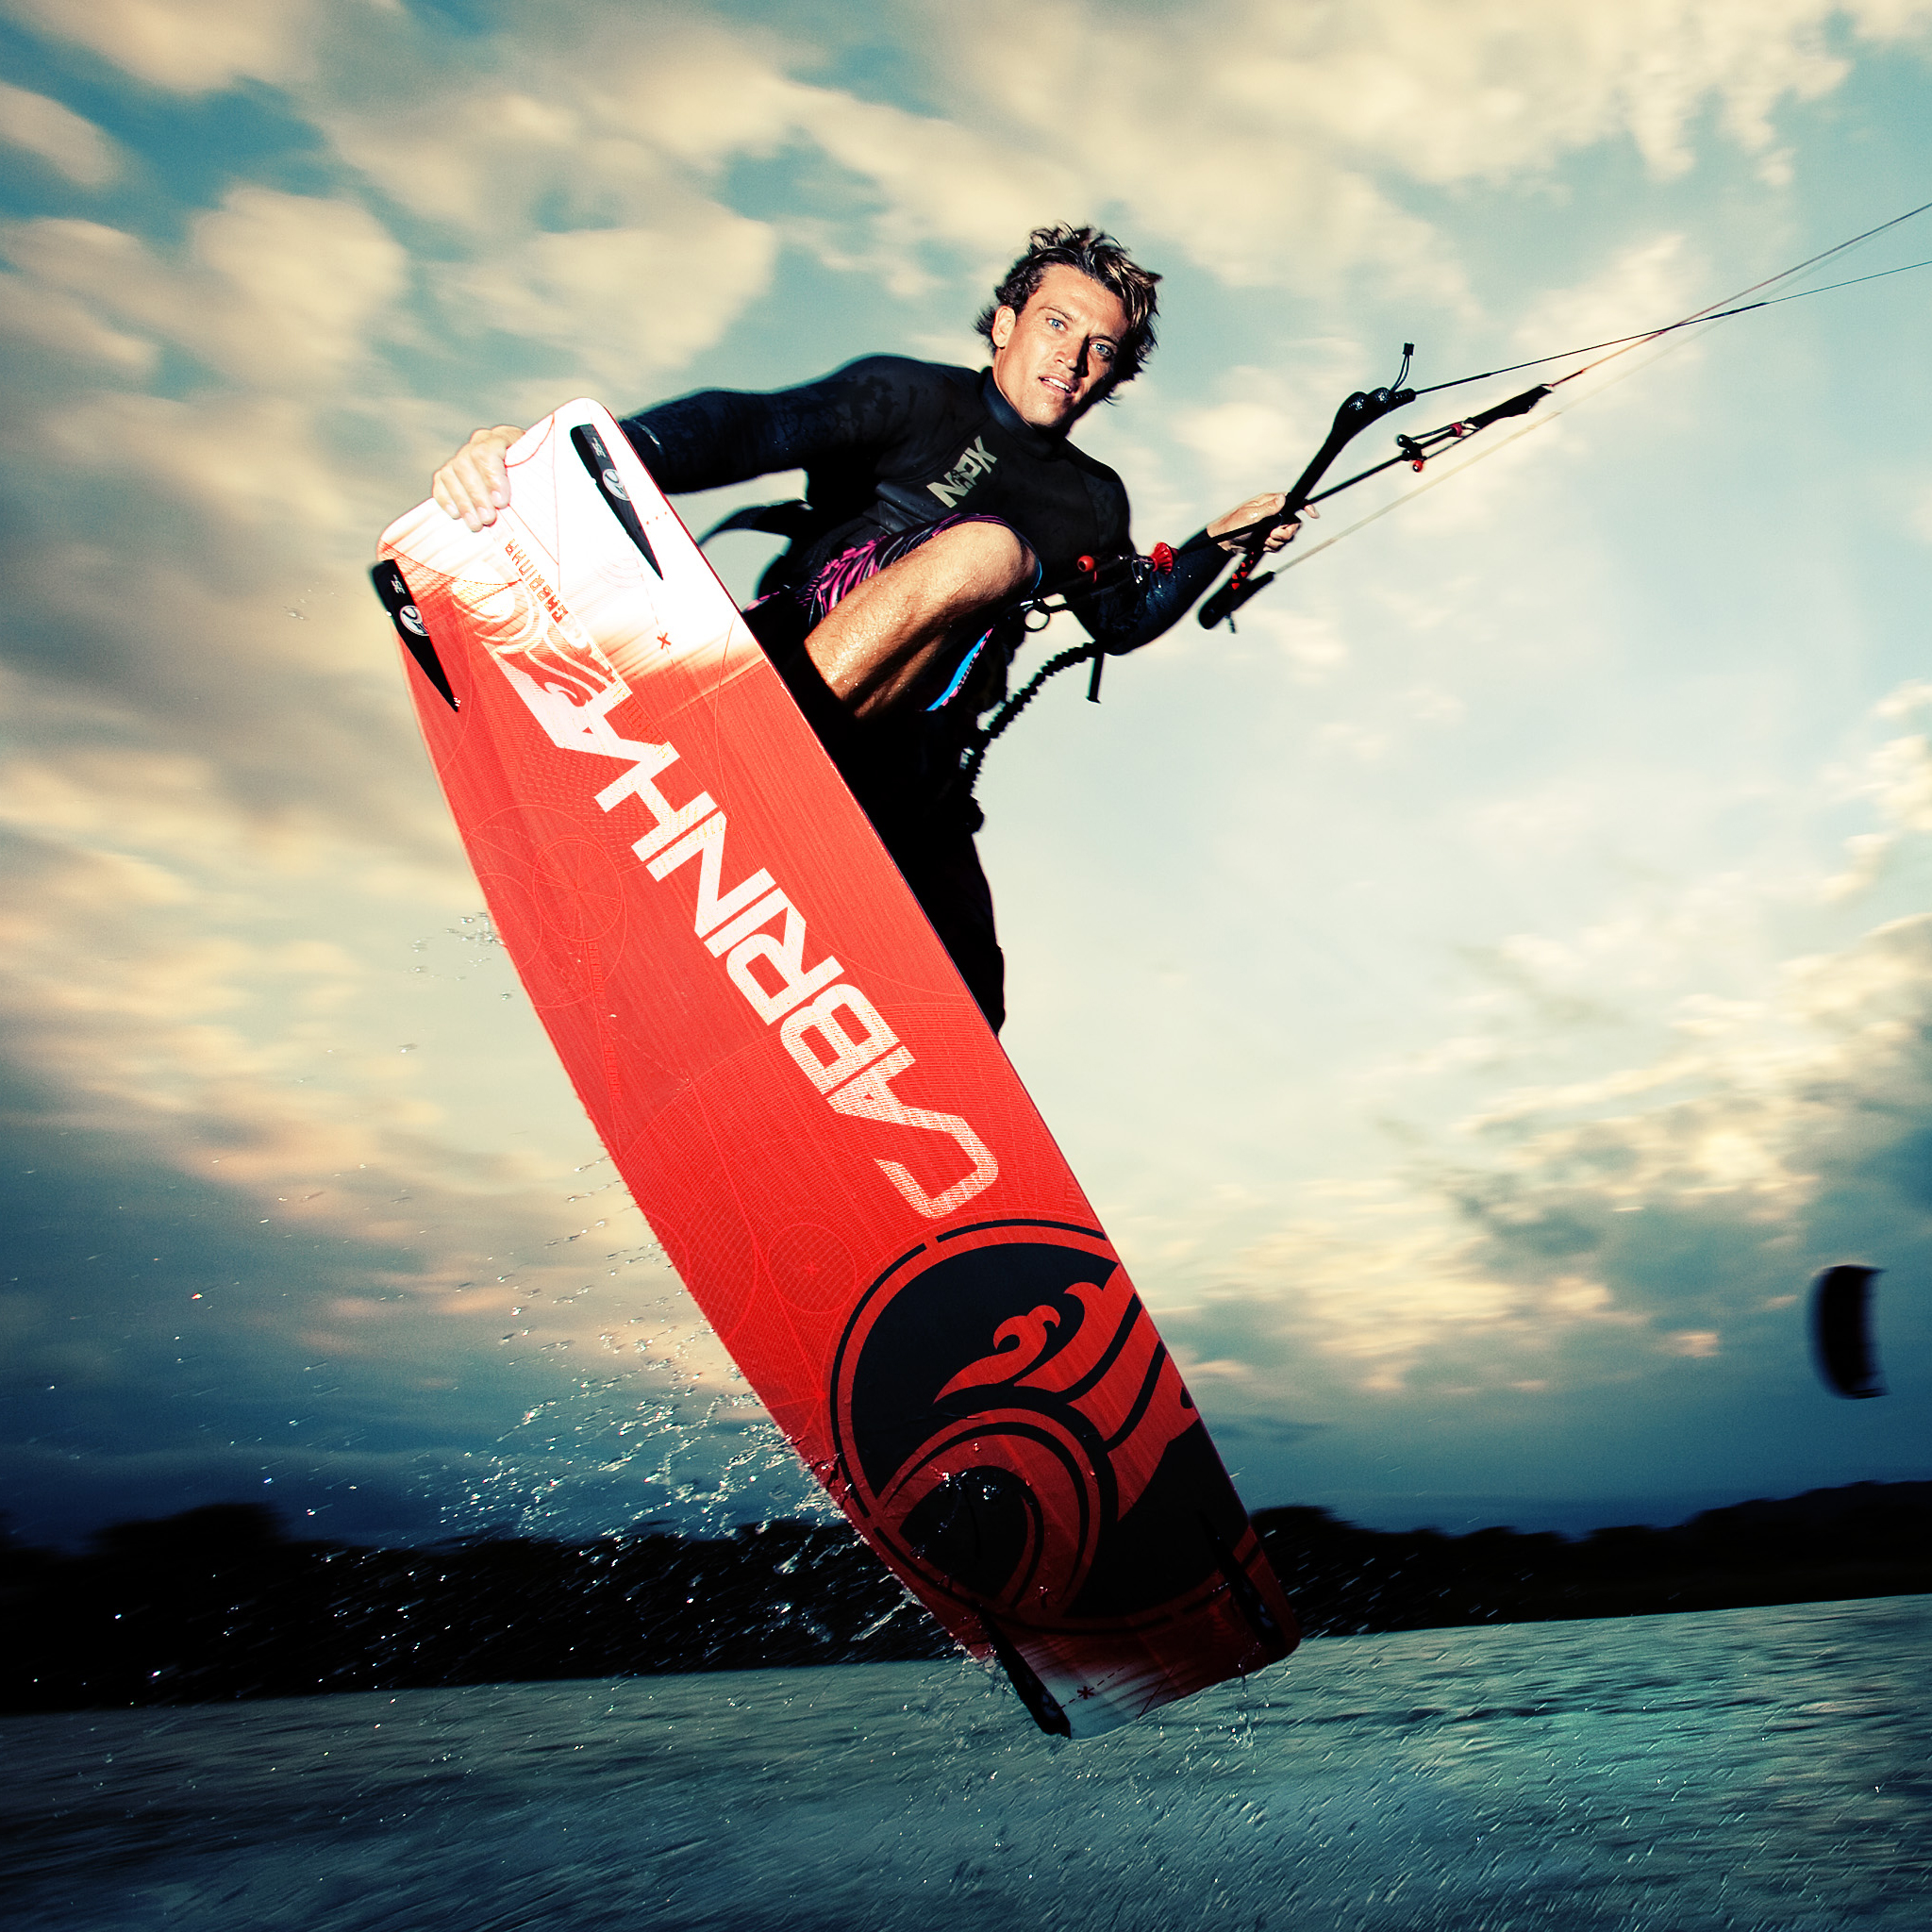 kitesurf wallpaper image - Damien LeRoy with a tailgrab at dusk on his Cabrinha kites gear - in resolution: iPad 2 & 3 2048 X 2048